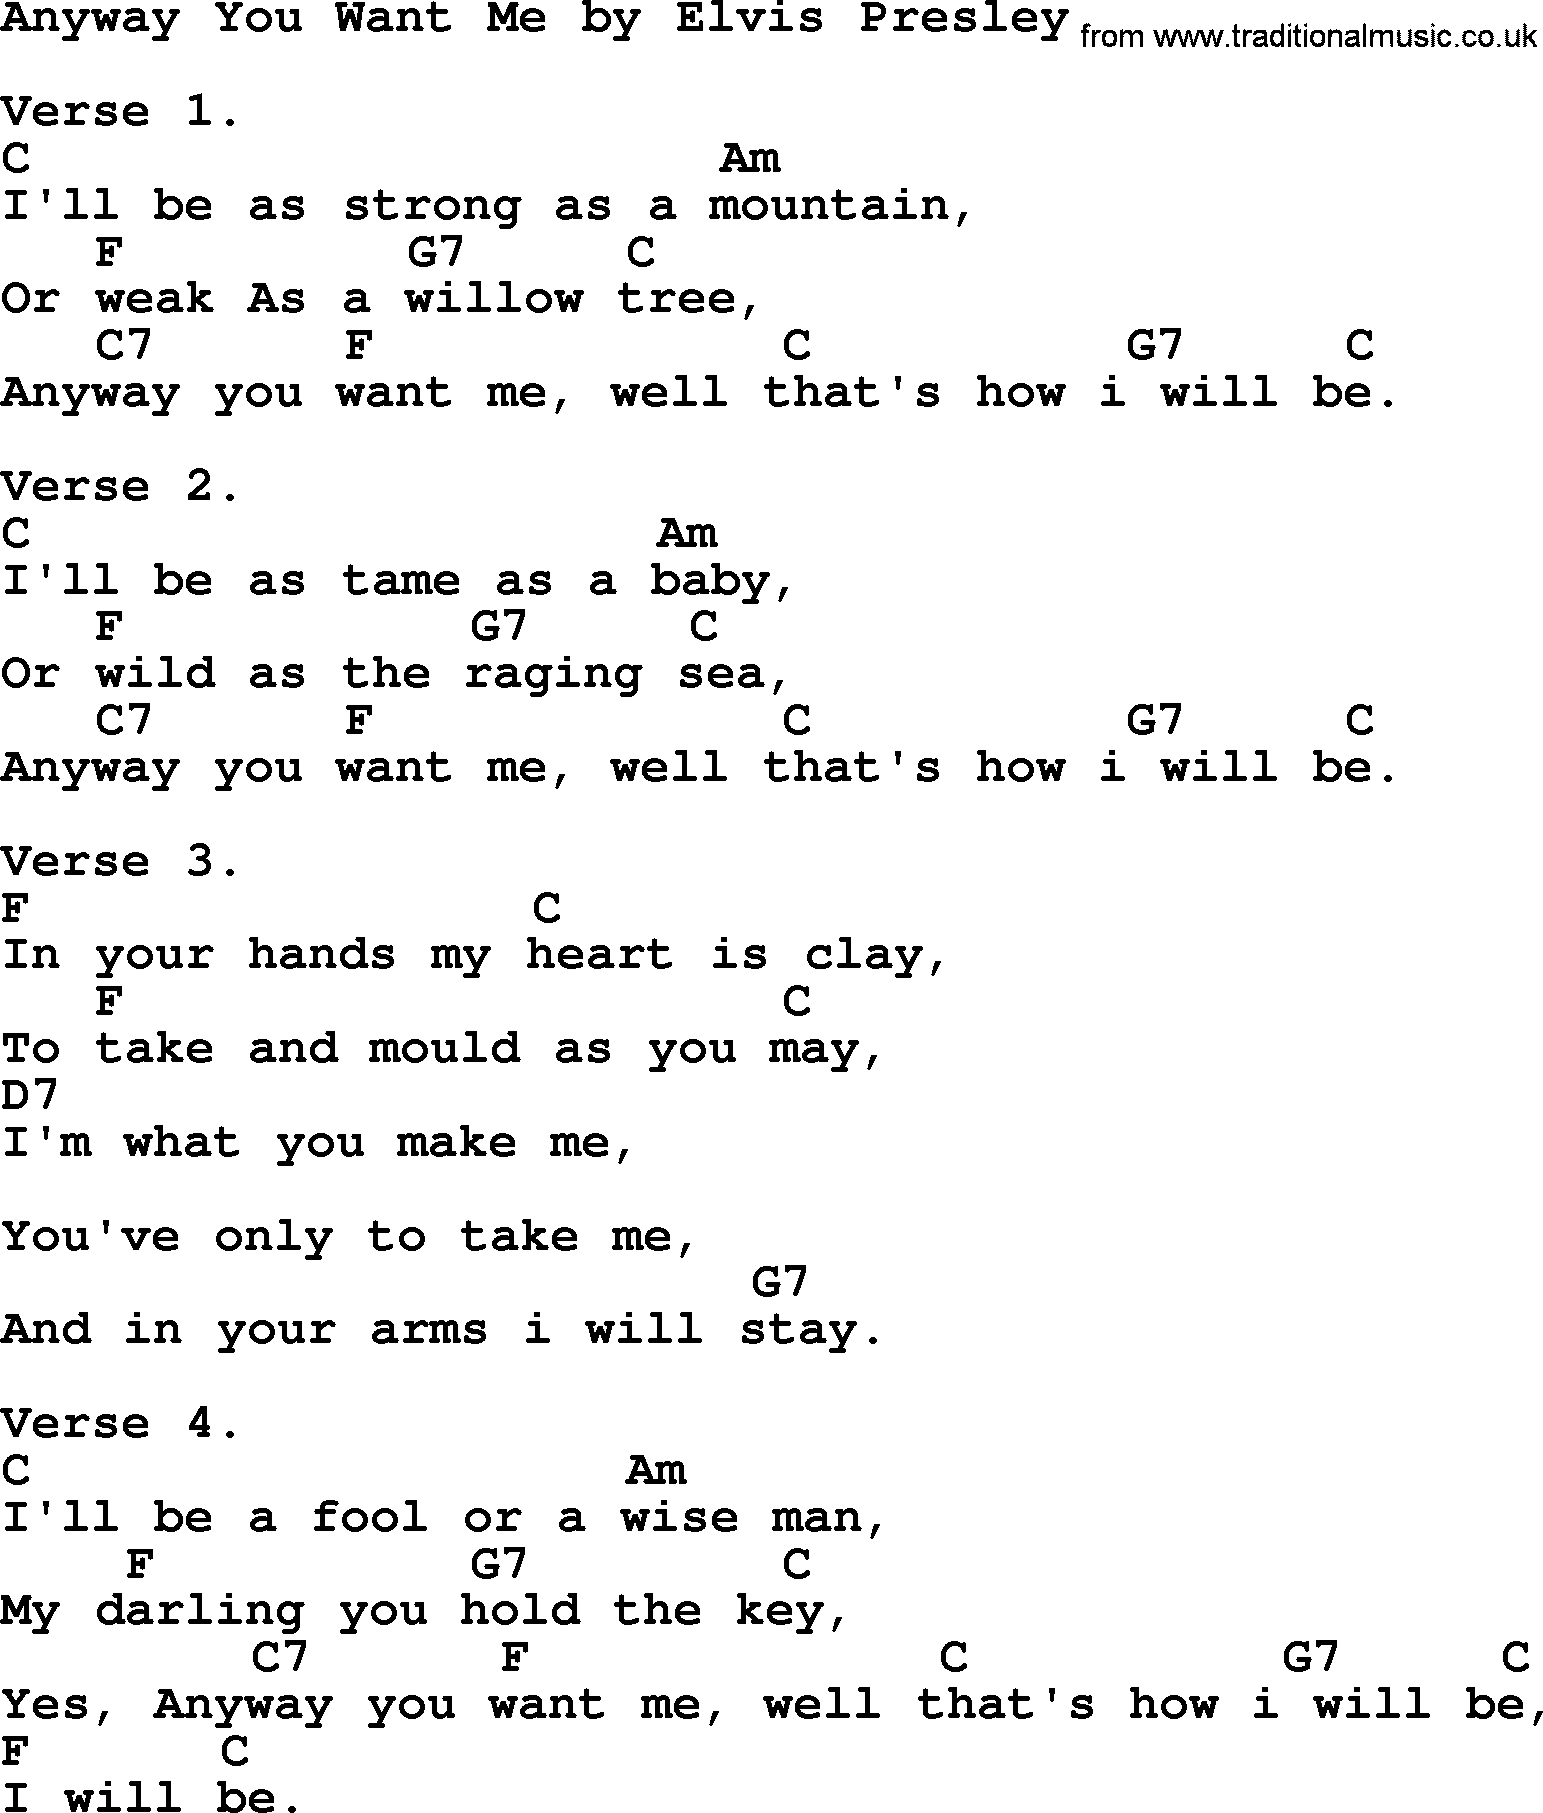 Elvis Presley song: Anyway You Want Me, lyrics and chords